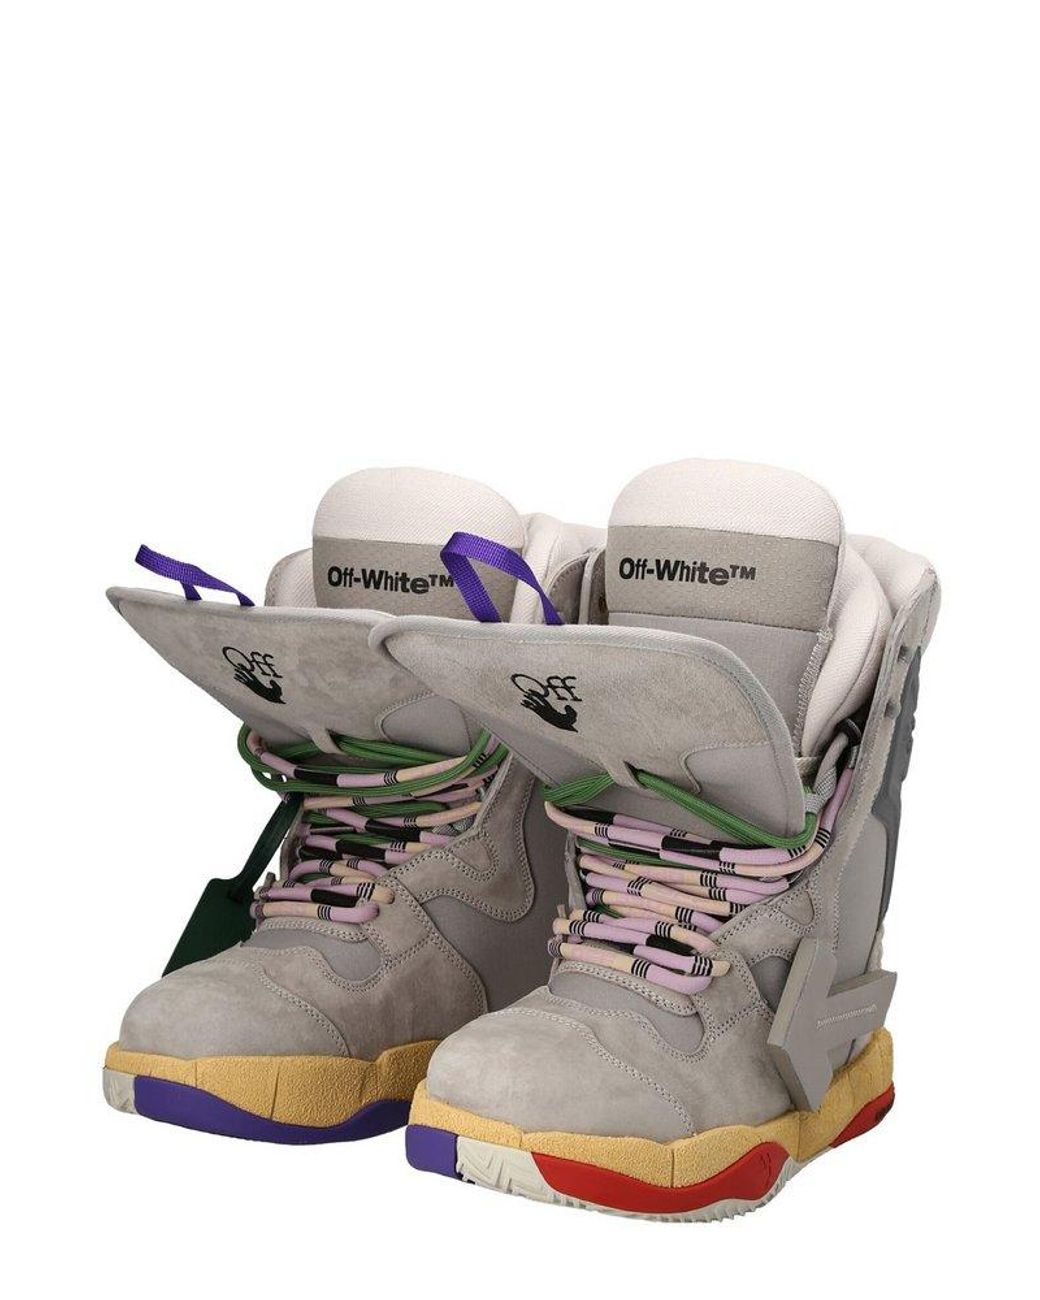 Off-White c/o Virgil Abloh Arrows-motif Lace-up Snow Boots in Gray | Lyst